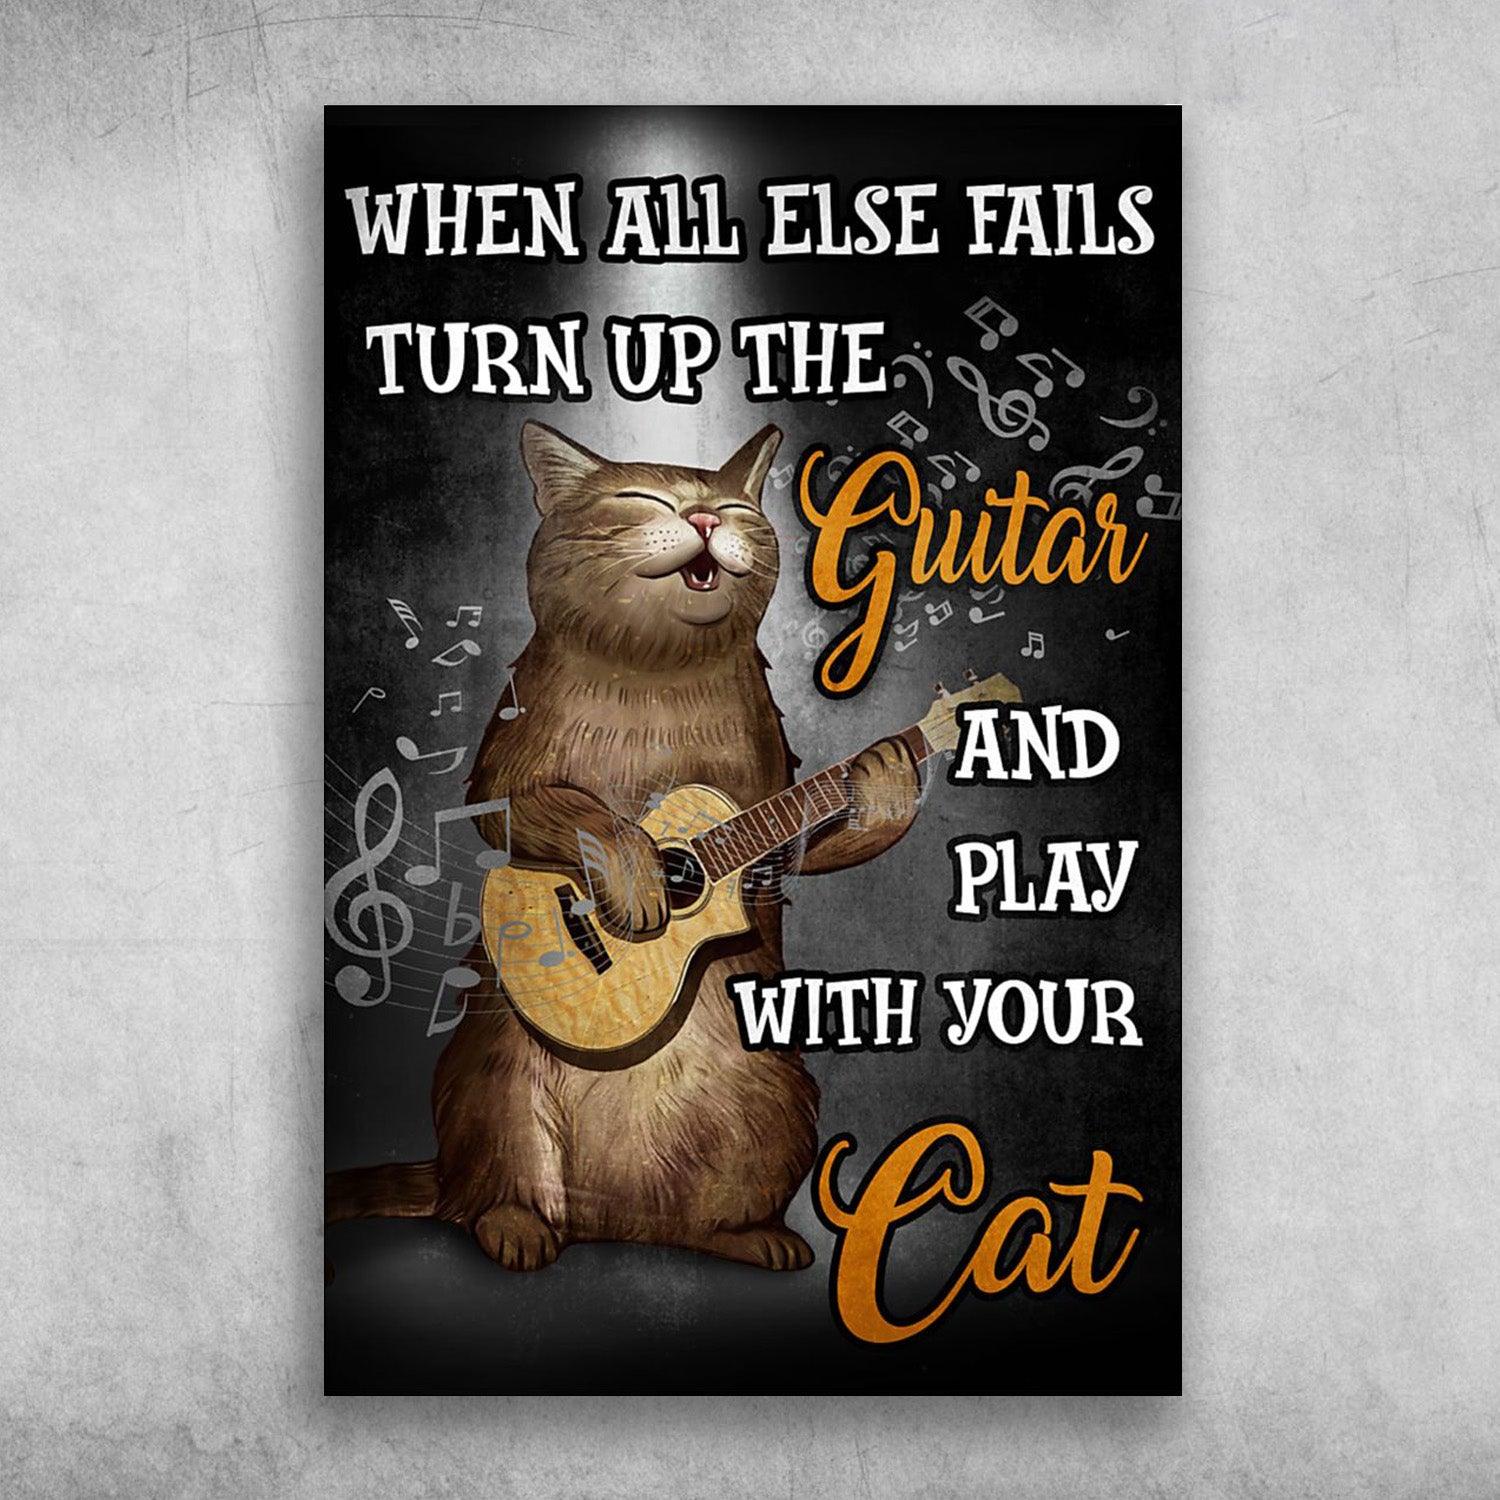 Cat Portrait Canvas - Playing Guitar When All Else Fails,Turn Up The Guitar And Play With Your Cat Canvas - Perfect Gift For Cat Lover, Friend, Family - Amzanimalsgift